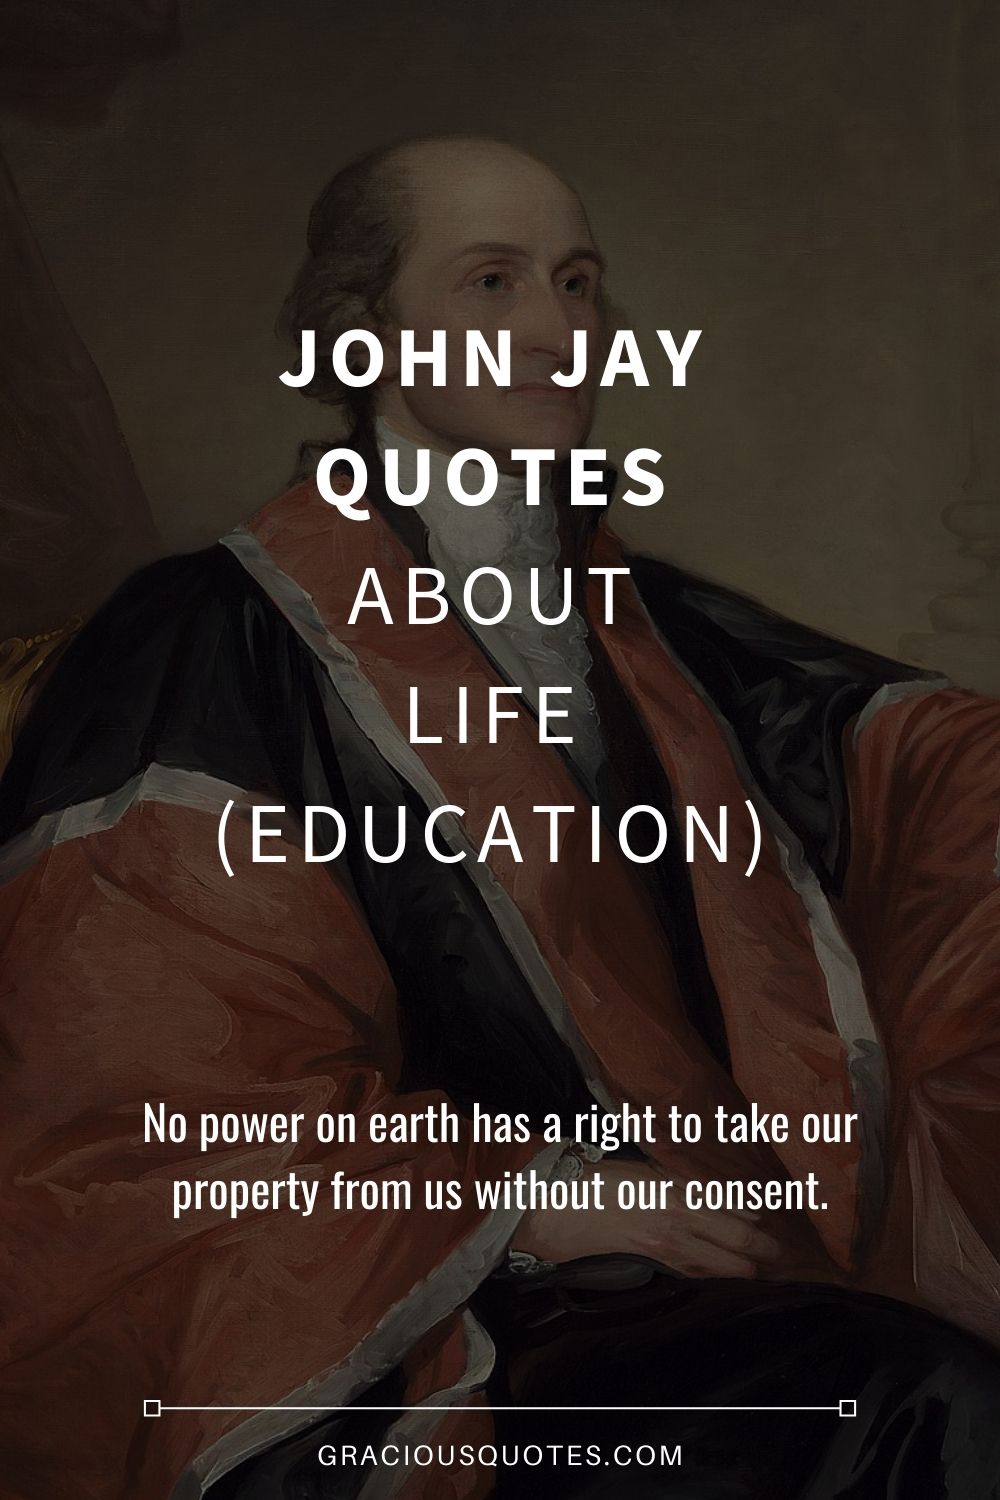 John Jay Quotes About Life (EDUCATION) - Gracious Quotes